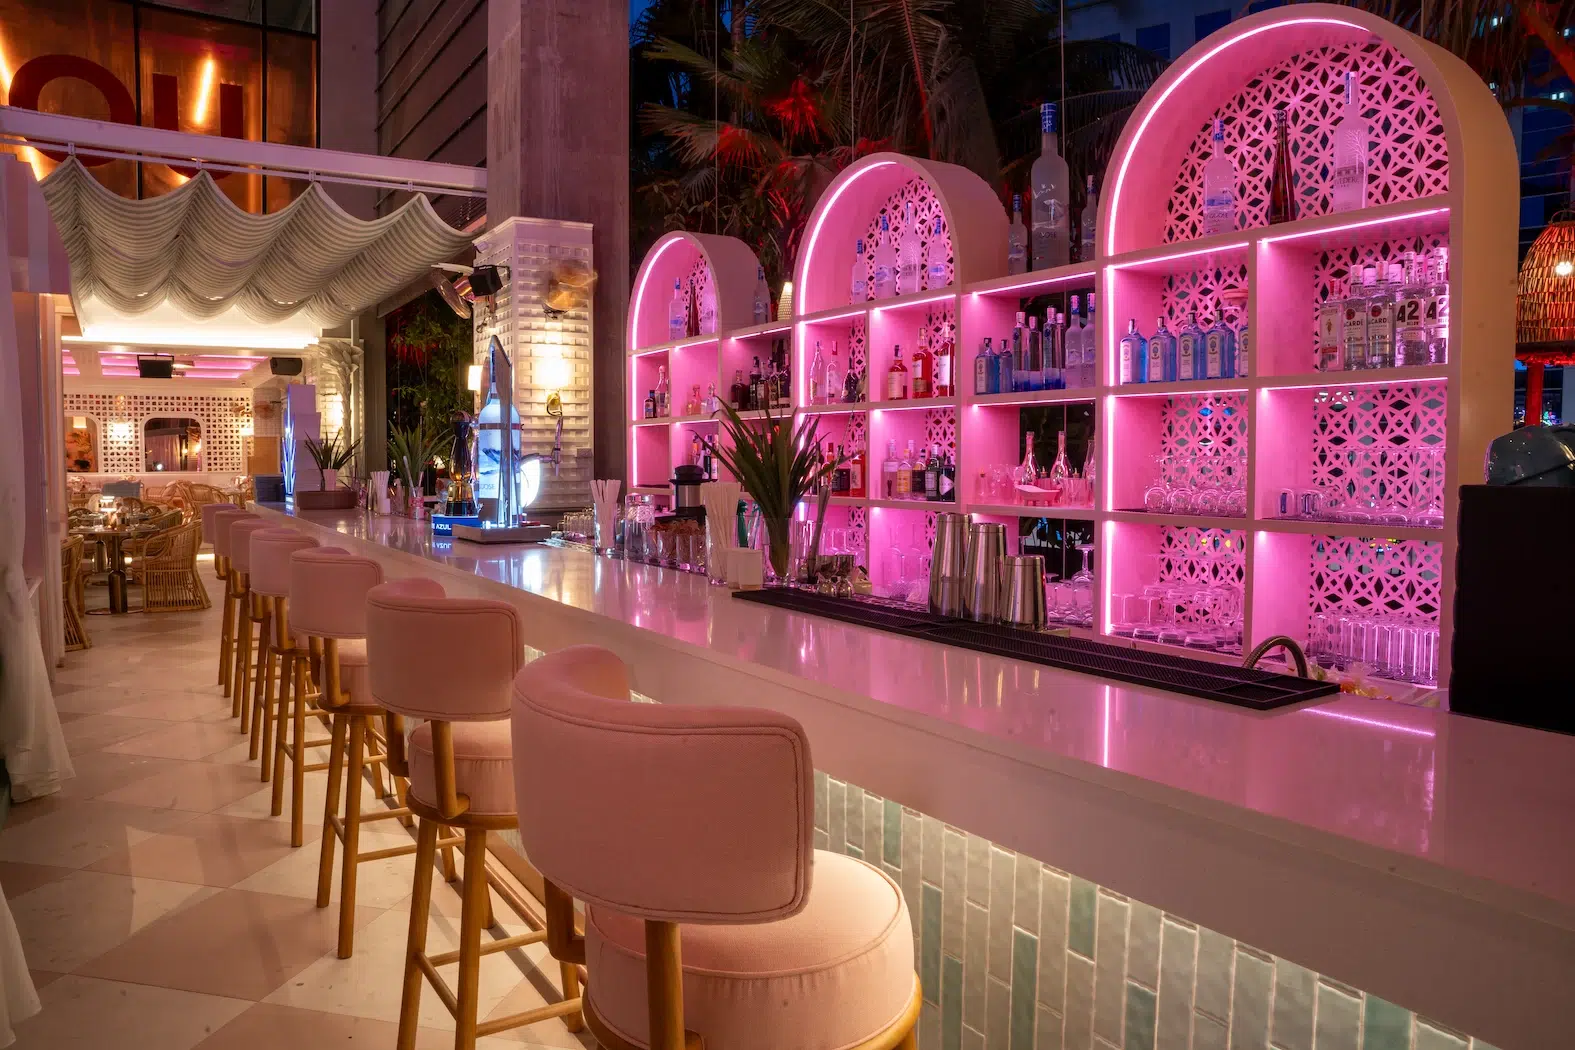 This is the photo of Mami Rose bar on the 5th floor of EmSphere mall in Bangkok (Thailand). This restaurant located on EmWonder floor looks like an old fancy Miami's restaurant in the 80's. You can see the bar with pink light and pink vintage style chairs.